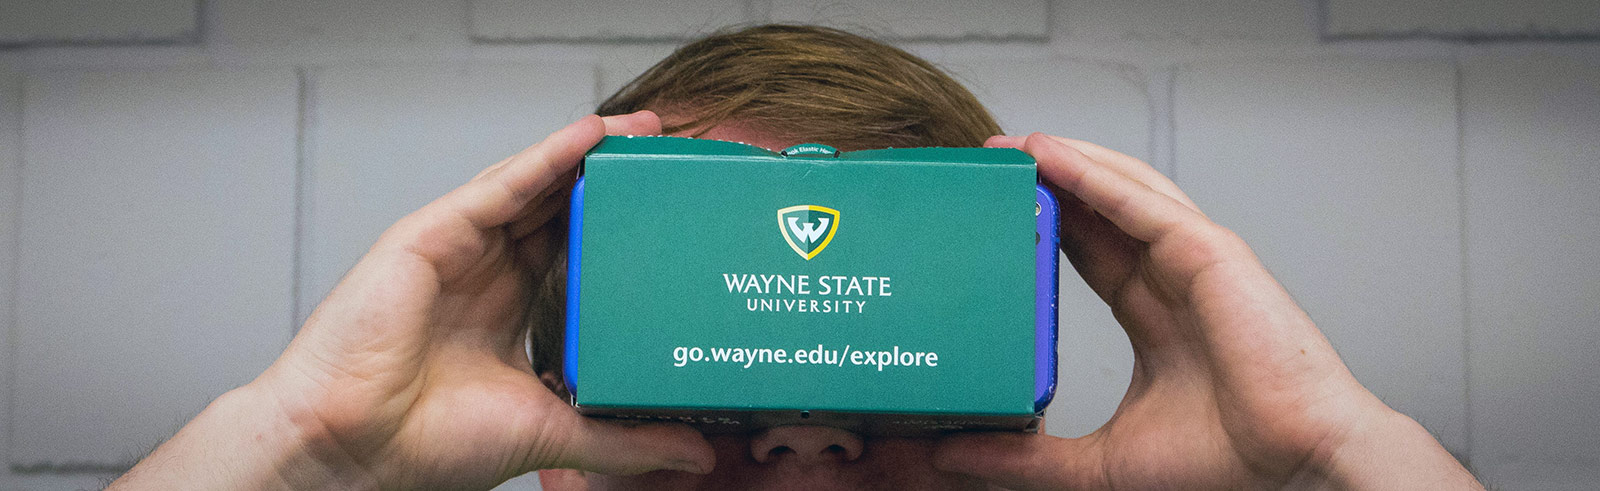 Sr. System Software Engineer for C&IT DeskTech, Eric Greene, demonstrates the new Wayne State Virtual Experience App Friday, Sept. 21, 2018.